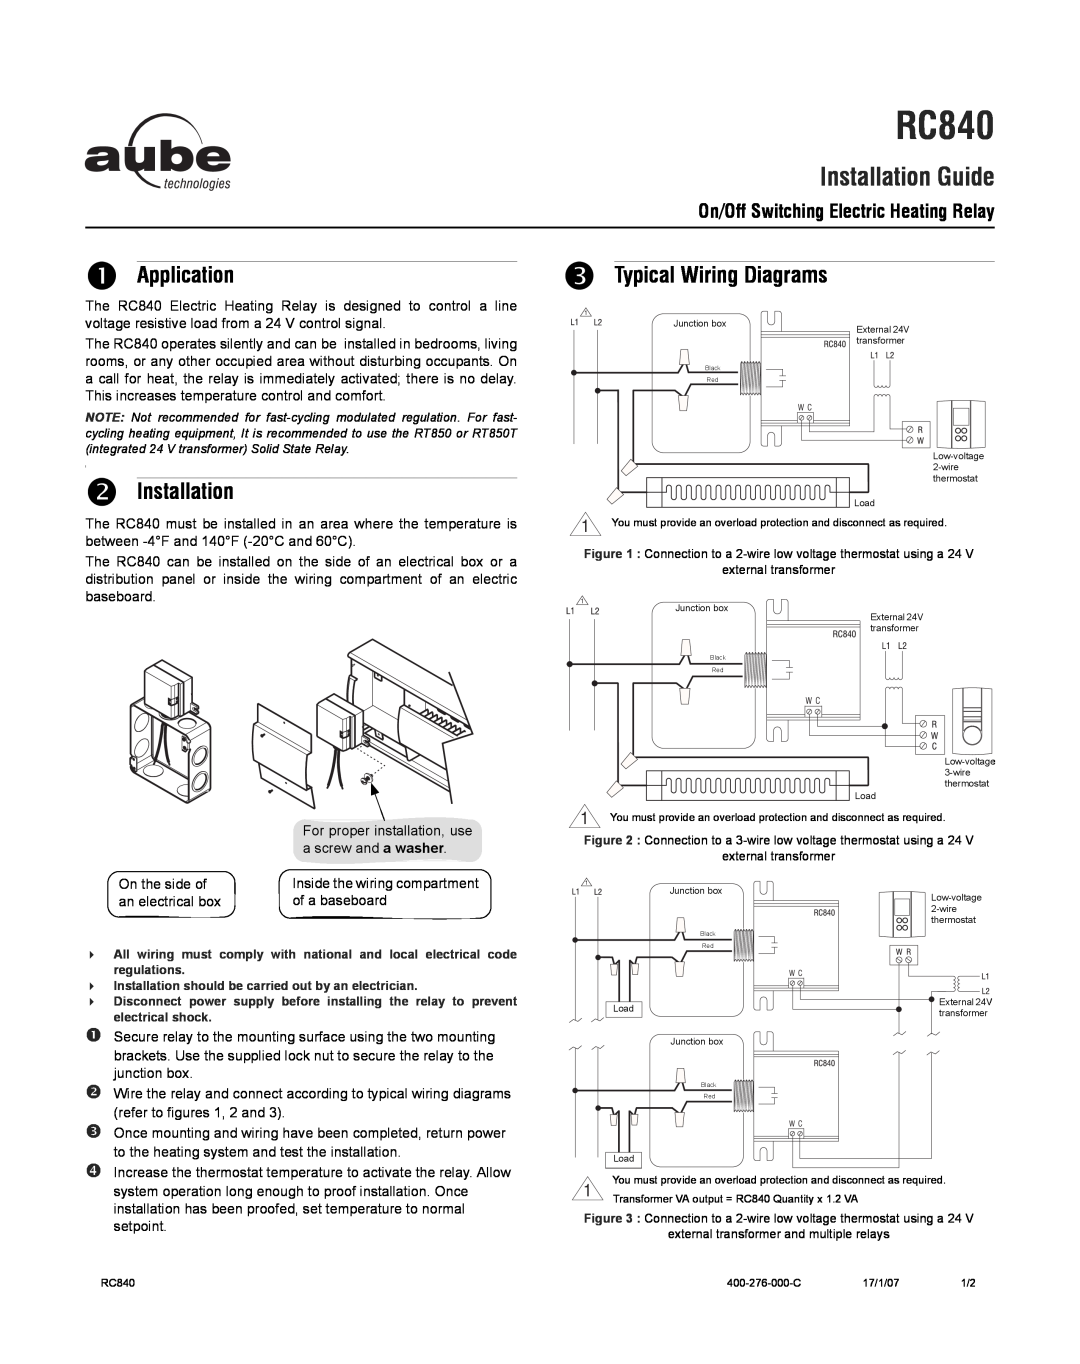 Aube Technologies RC840 manual n Application, o Installation, p Typical Wiring Diagrams, Installation Guide 